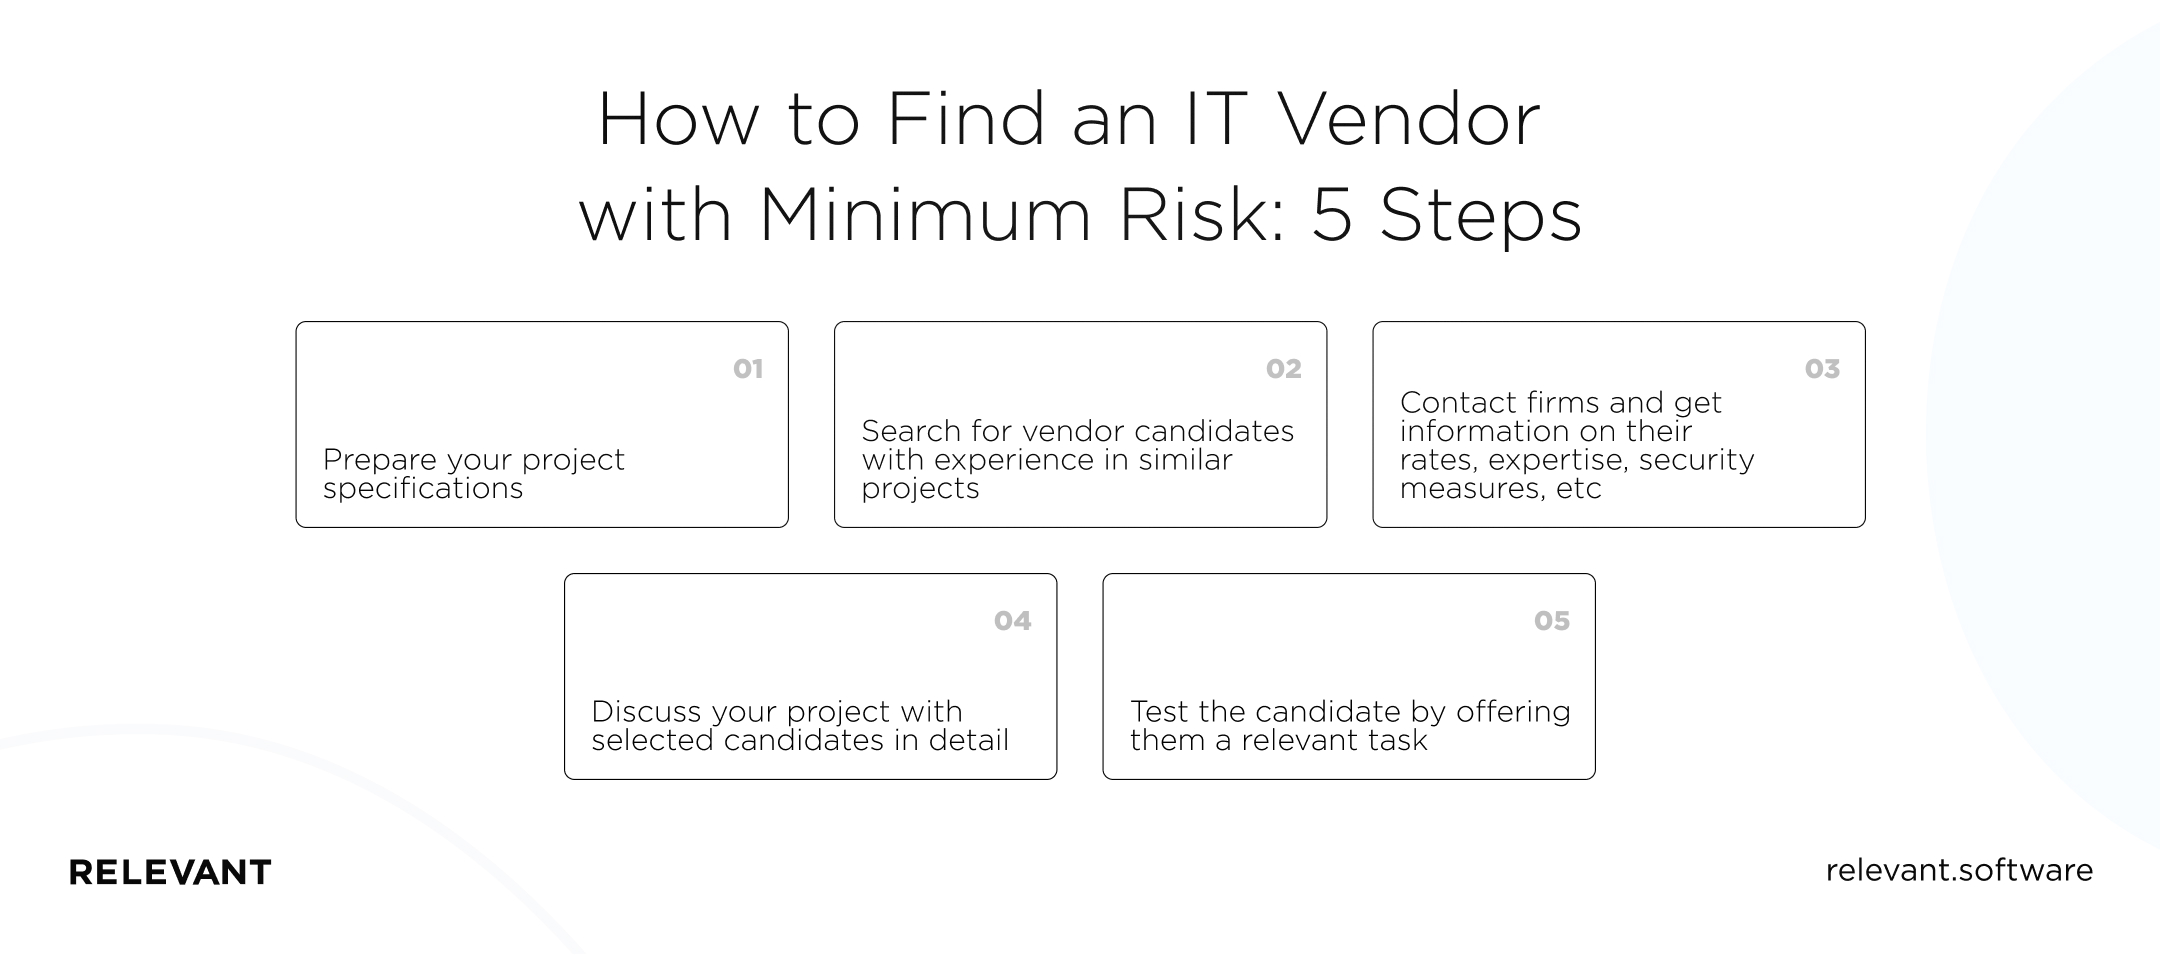 How to Find an IT Vendor with Minimum Risk